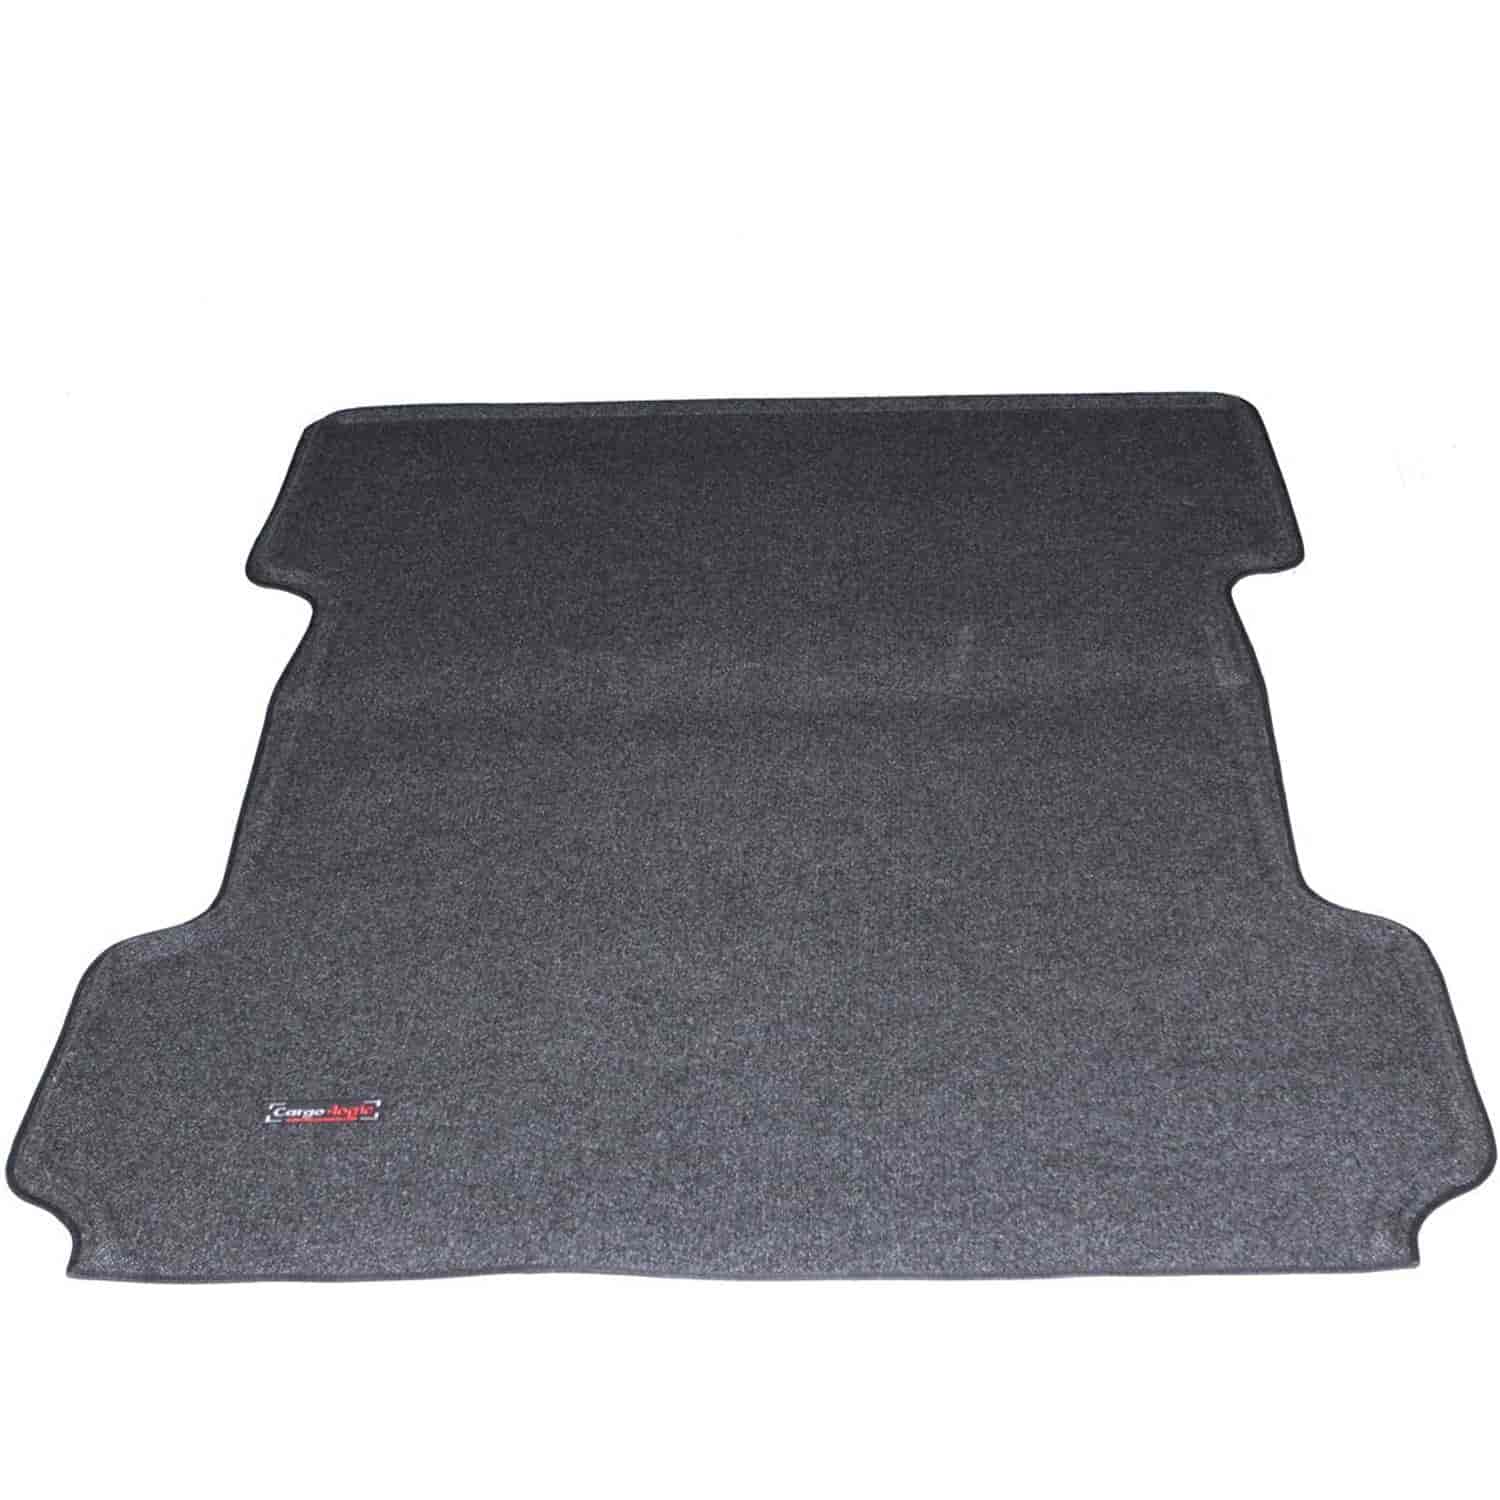 Cargo Logic Truck Bed Liner for 2007-2014 Chevy Silverado/GMC Sierra 6' Bed